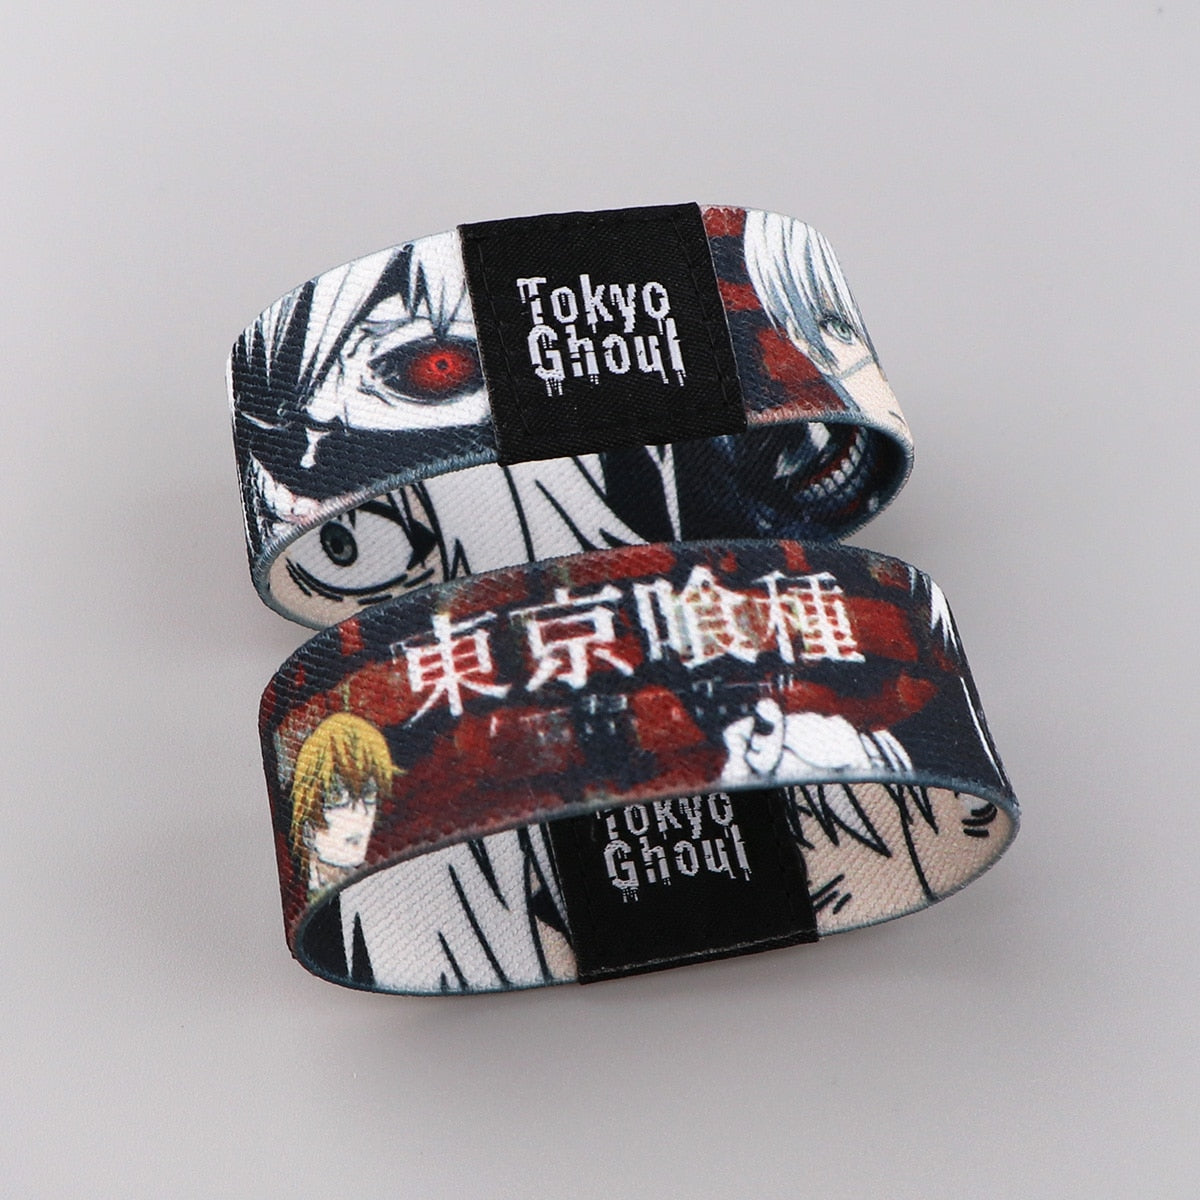 Tokyo Ghoul Sports Wristbands